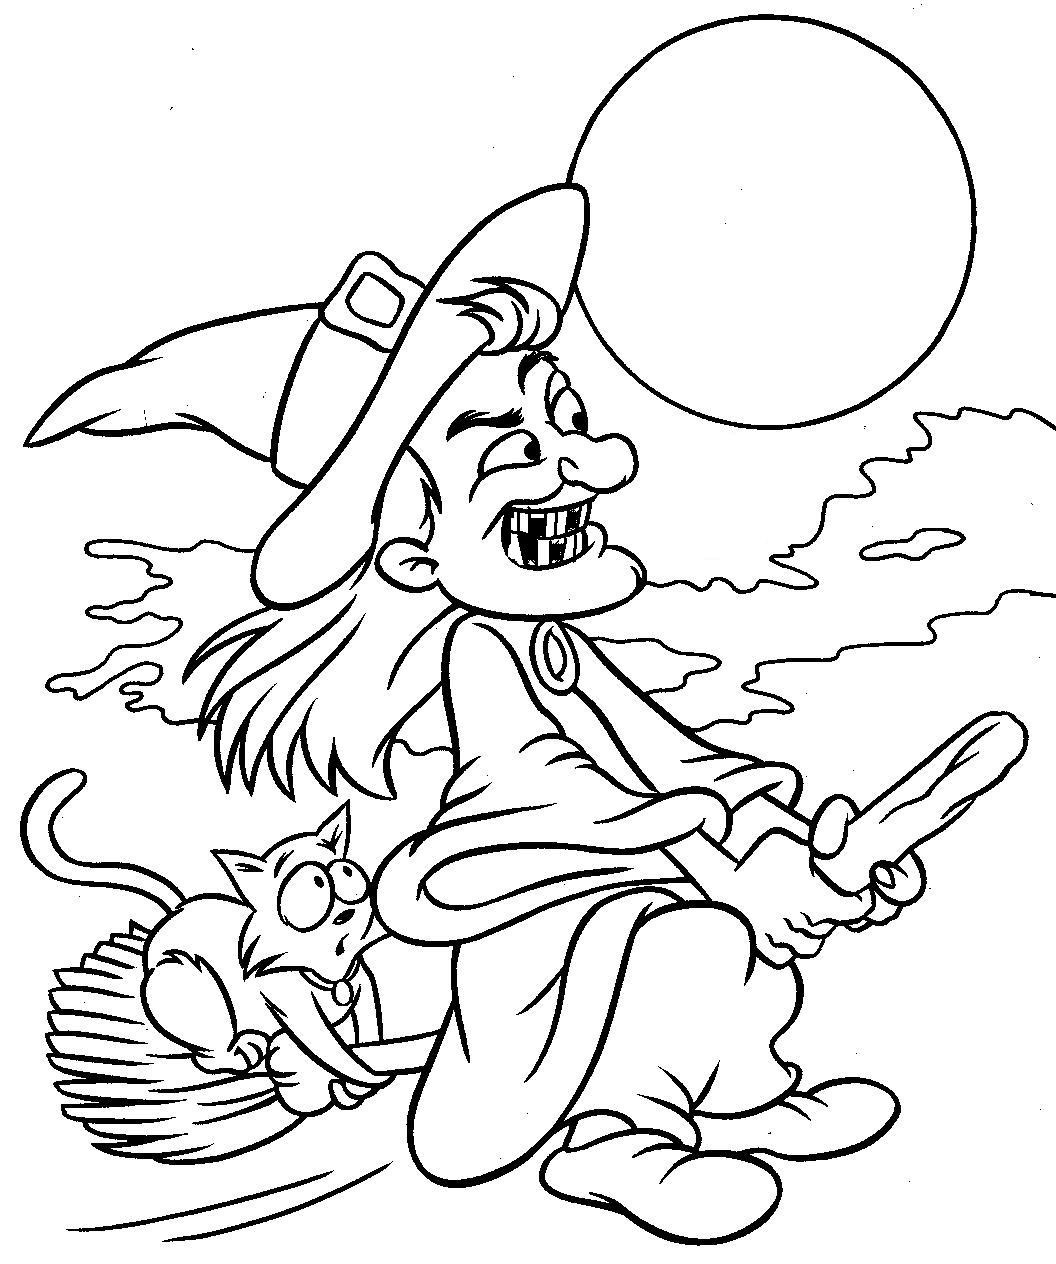 Kids Halloween Coloring Page
 coloring Halloween coloring pics